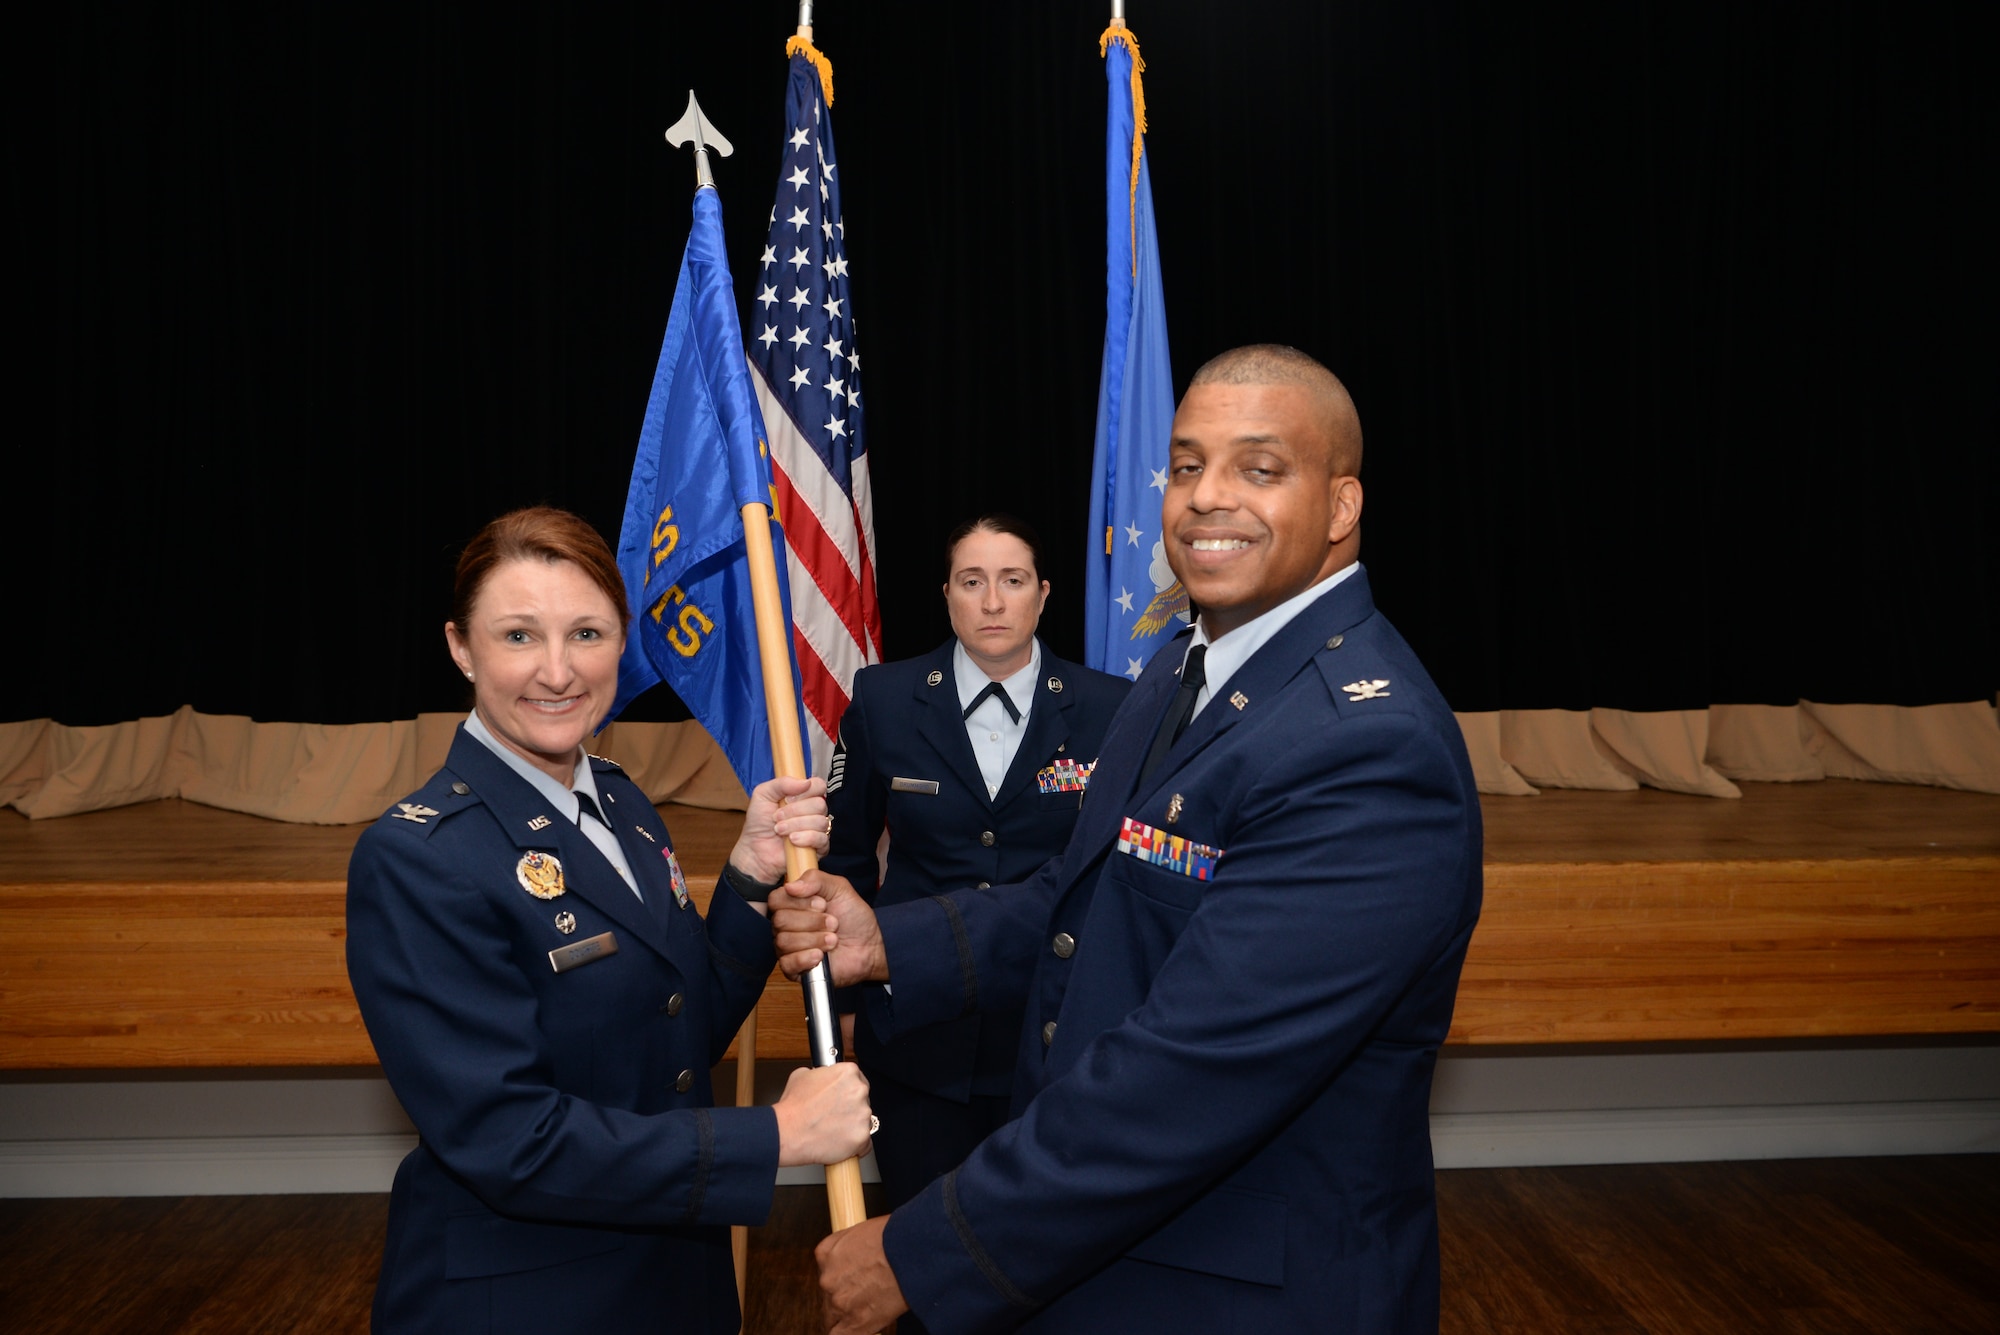 U.S. Air Force Col. Beatrice Dolihite, 81st Medical Group commander, passes the guidon to Col. Trent Tate, incoming 81st Diagnostics and Therapeutics Squadron commander, during a change of command ceremony inside the Don Wylie Auditorium on Keesler Air Force Base, Mississippi, June 27, 2019. The passing of the guidon is a ceremonial symbol of exchanging command from one commander to another. (U.S. Air Force photo by Airman 1st Class Spencer Tobler)